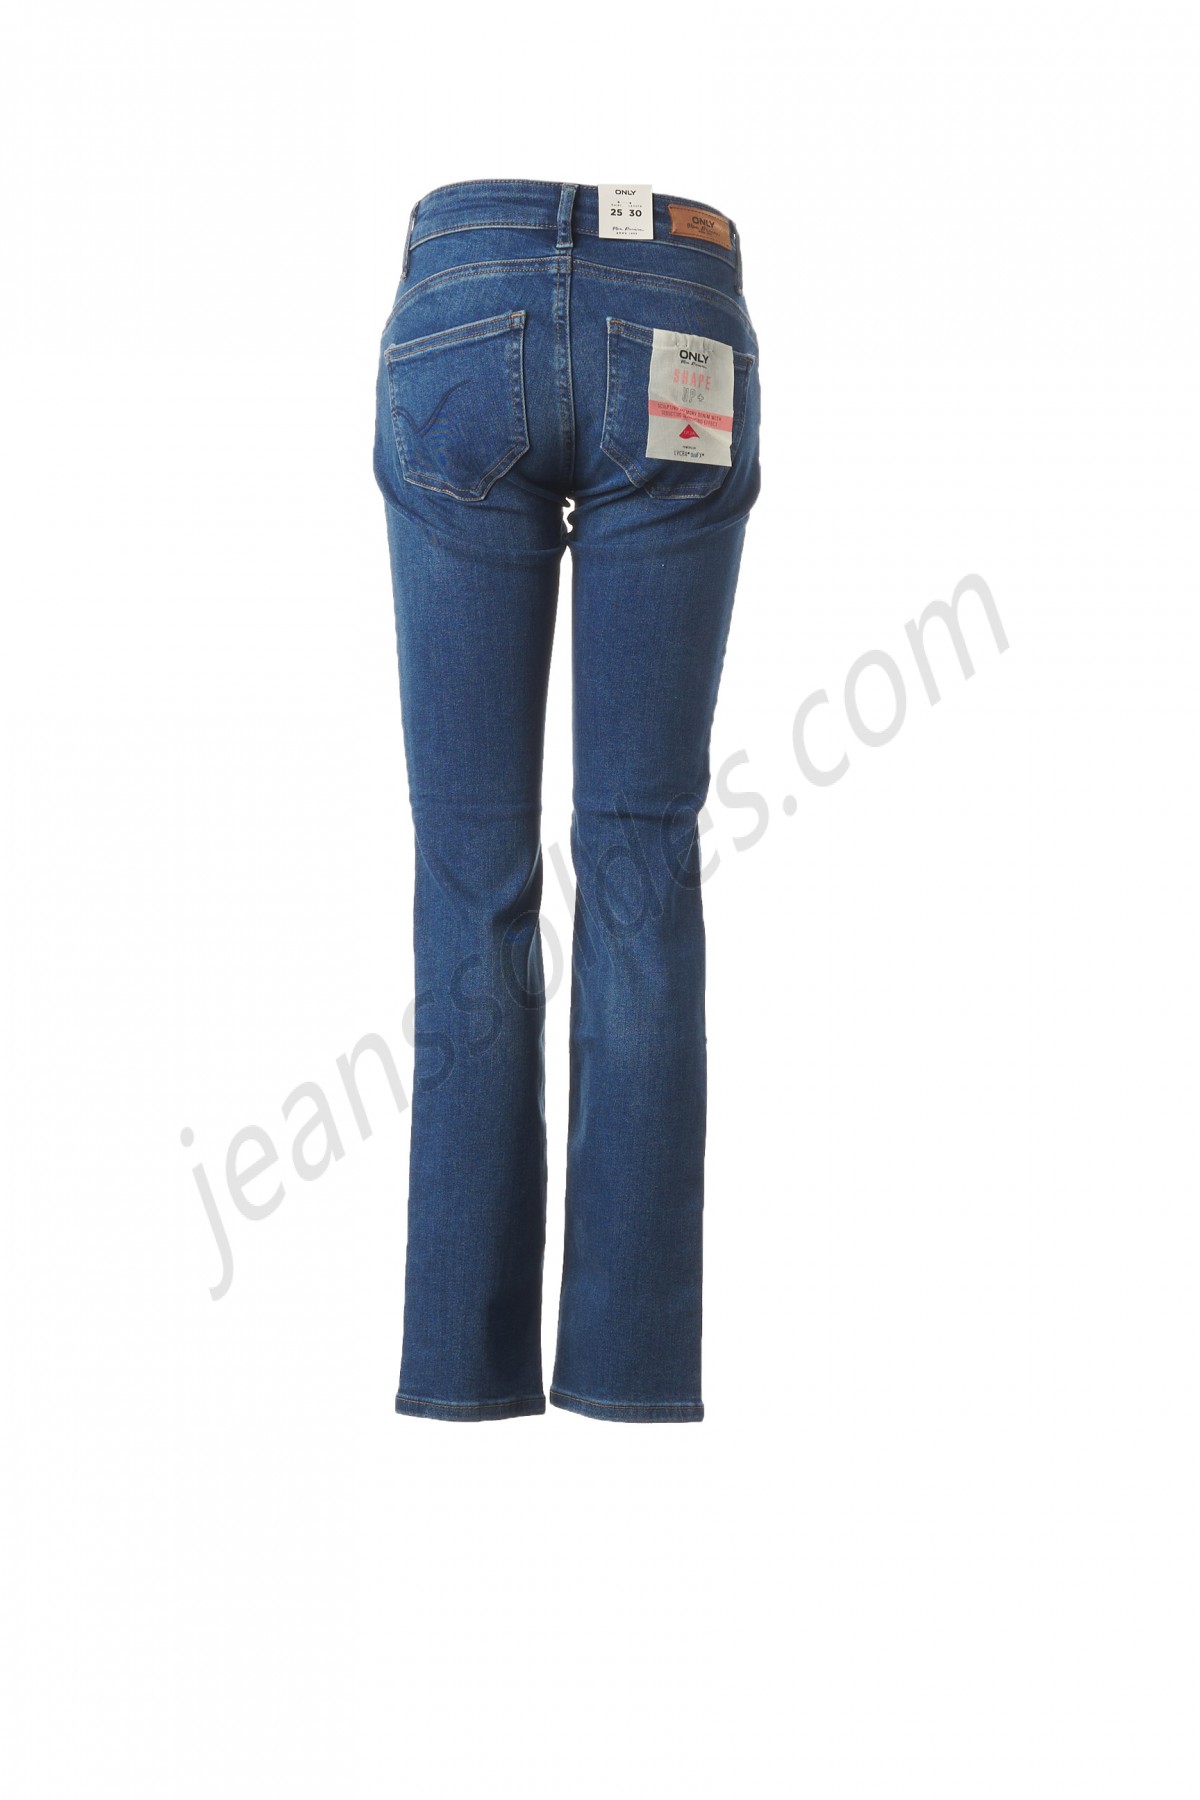 only-Jeans coupe slim prix d’amis - -1